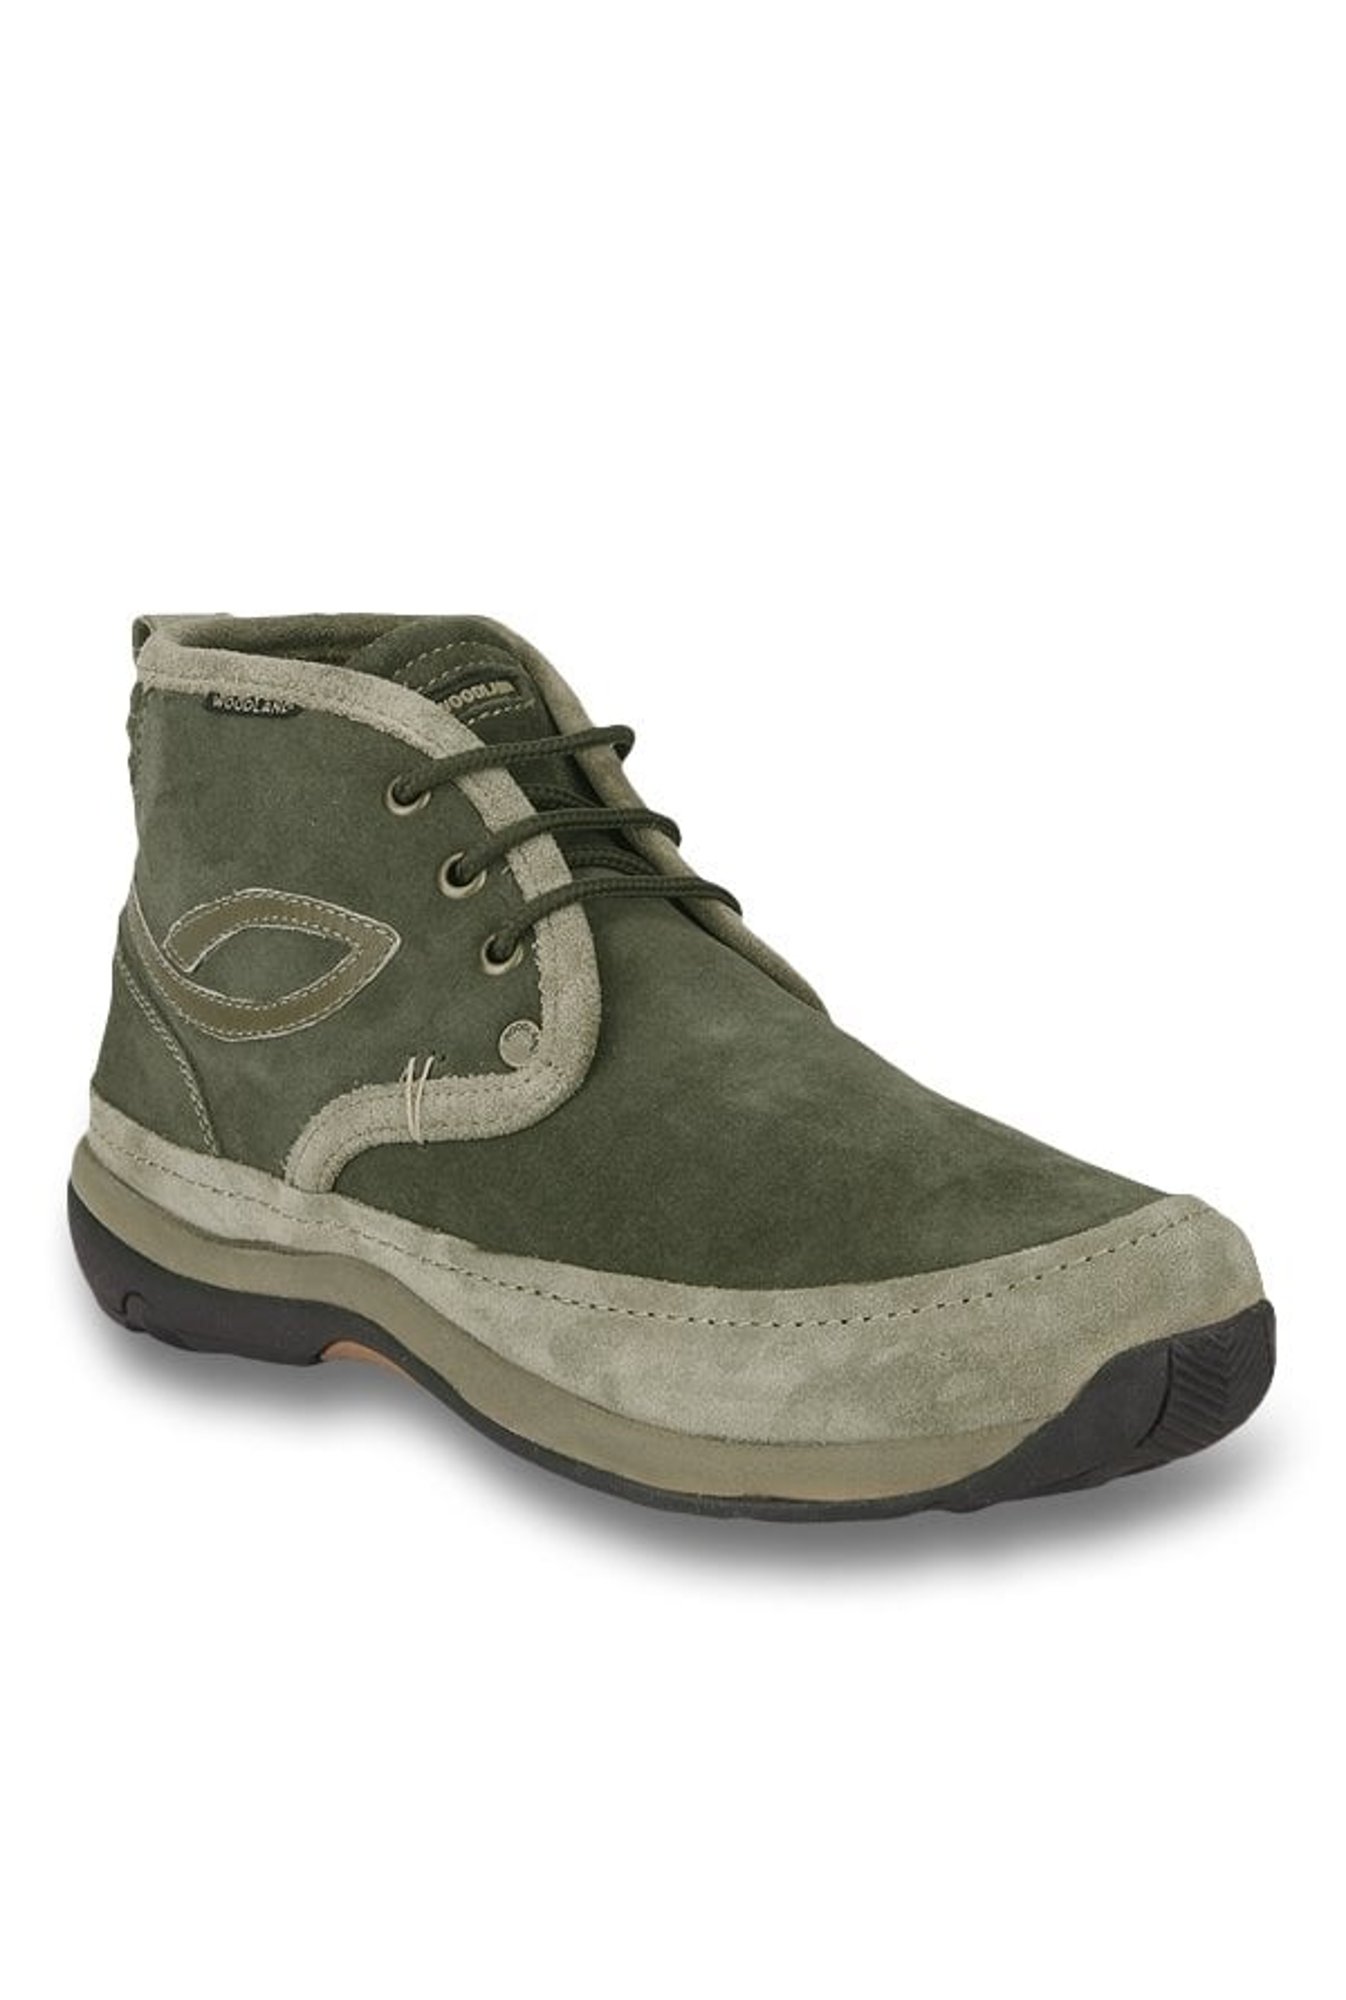 woodland olive derby boots